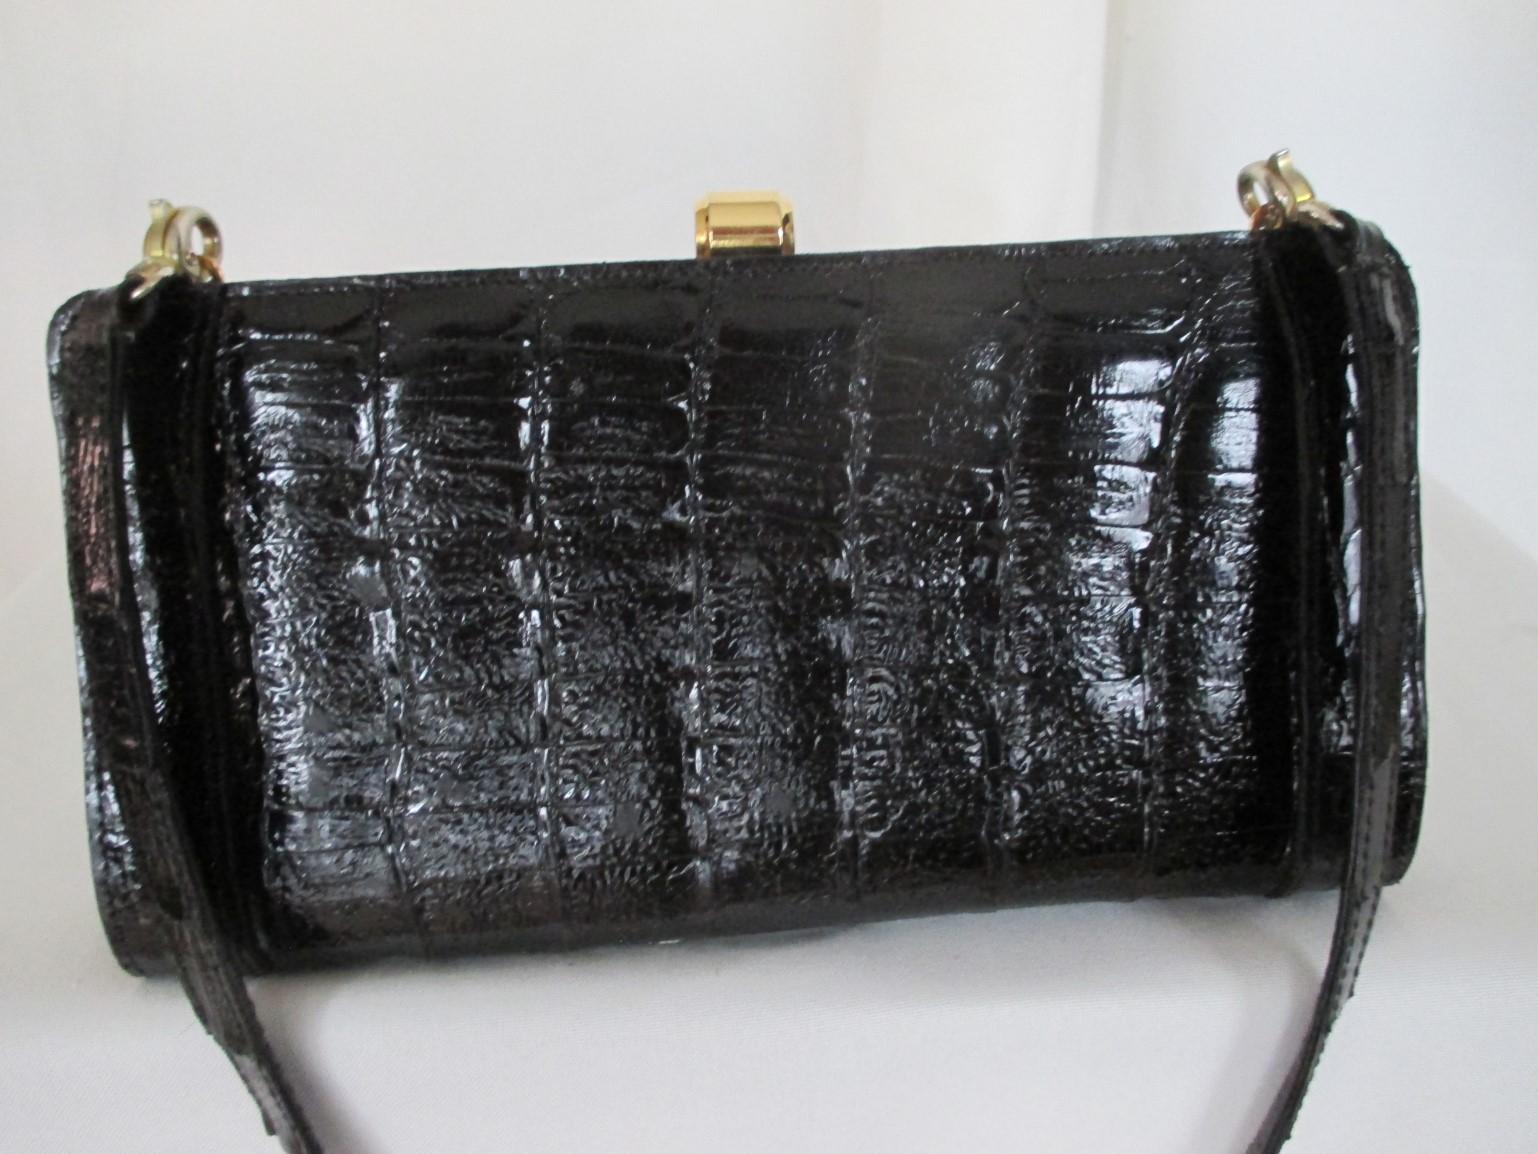 Collectors item!
This rare Dior vintage clutch is made from black crocodile leather with gold-plated hardware.
Inclusive an adjustable strap, 90 cm / 35.43 inch and closes with a clip button in the middle.
The interior is suede leather with a pocket